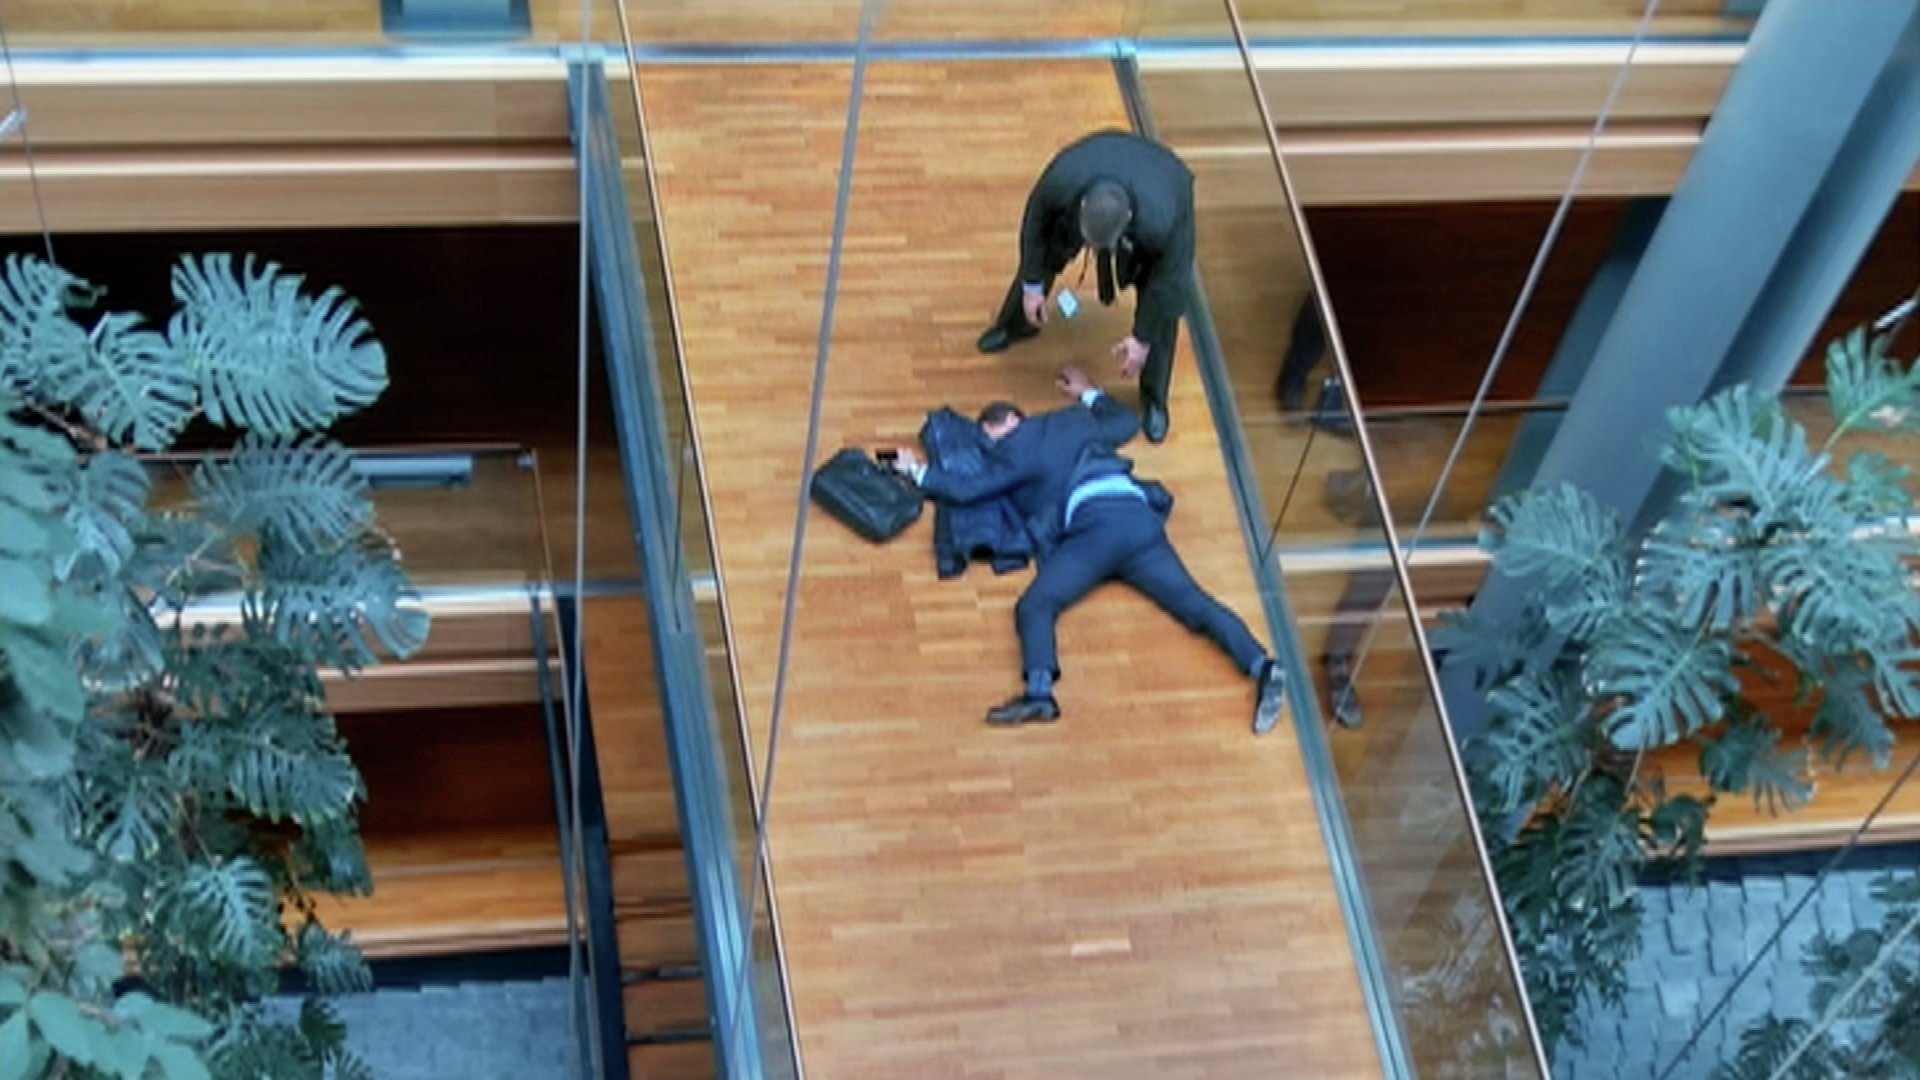 Deputy of European Parliament fell out of a window during a fight